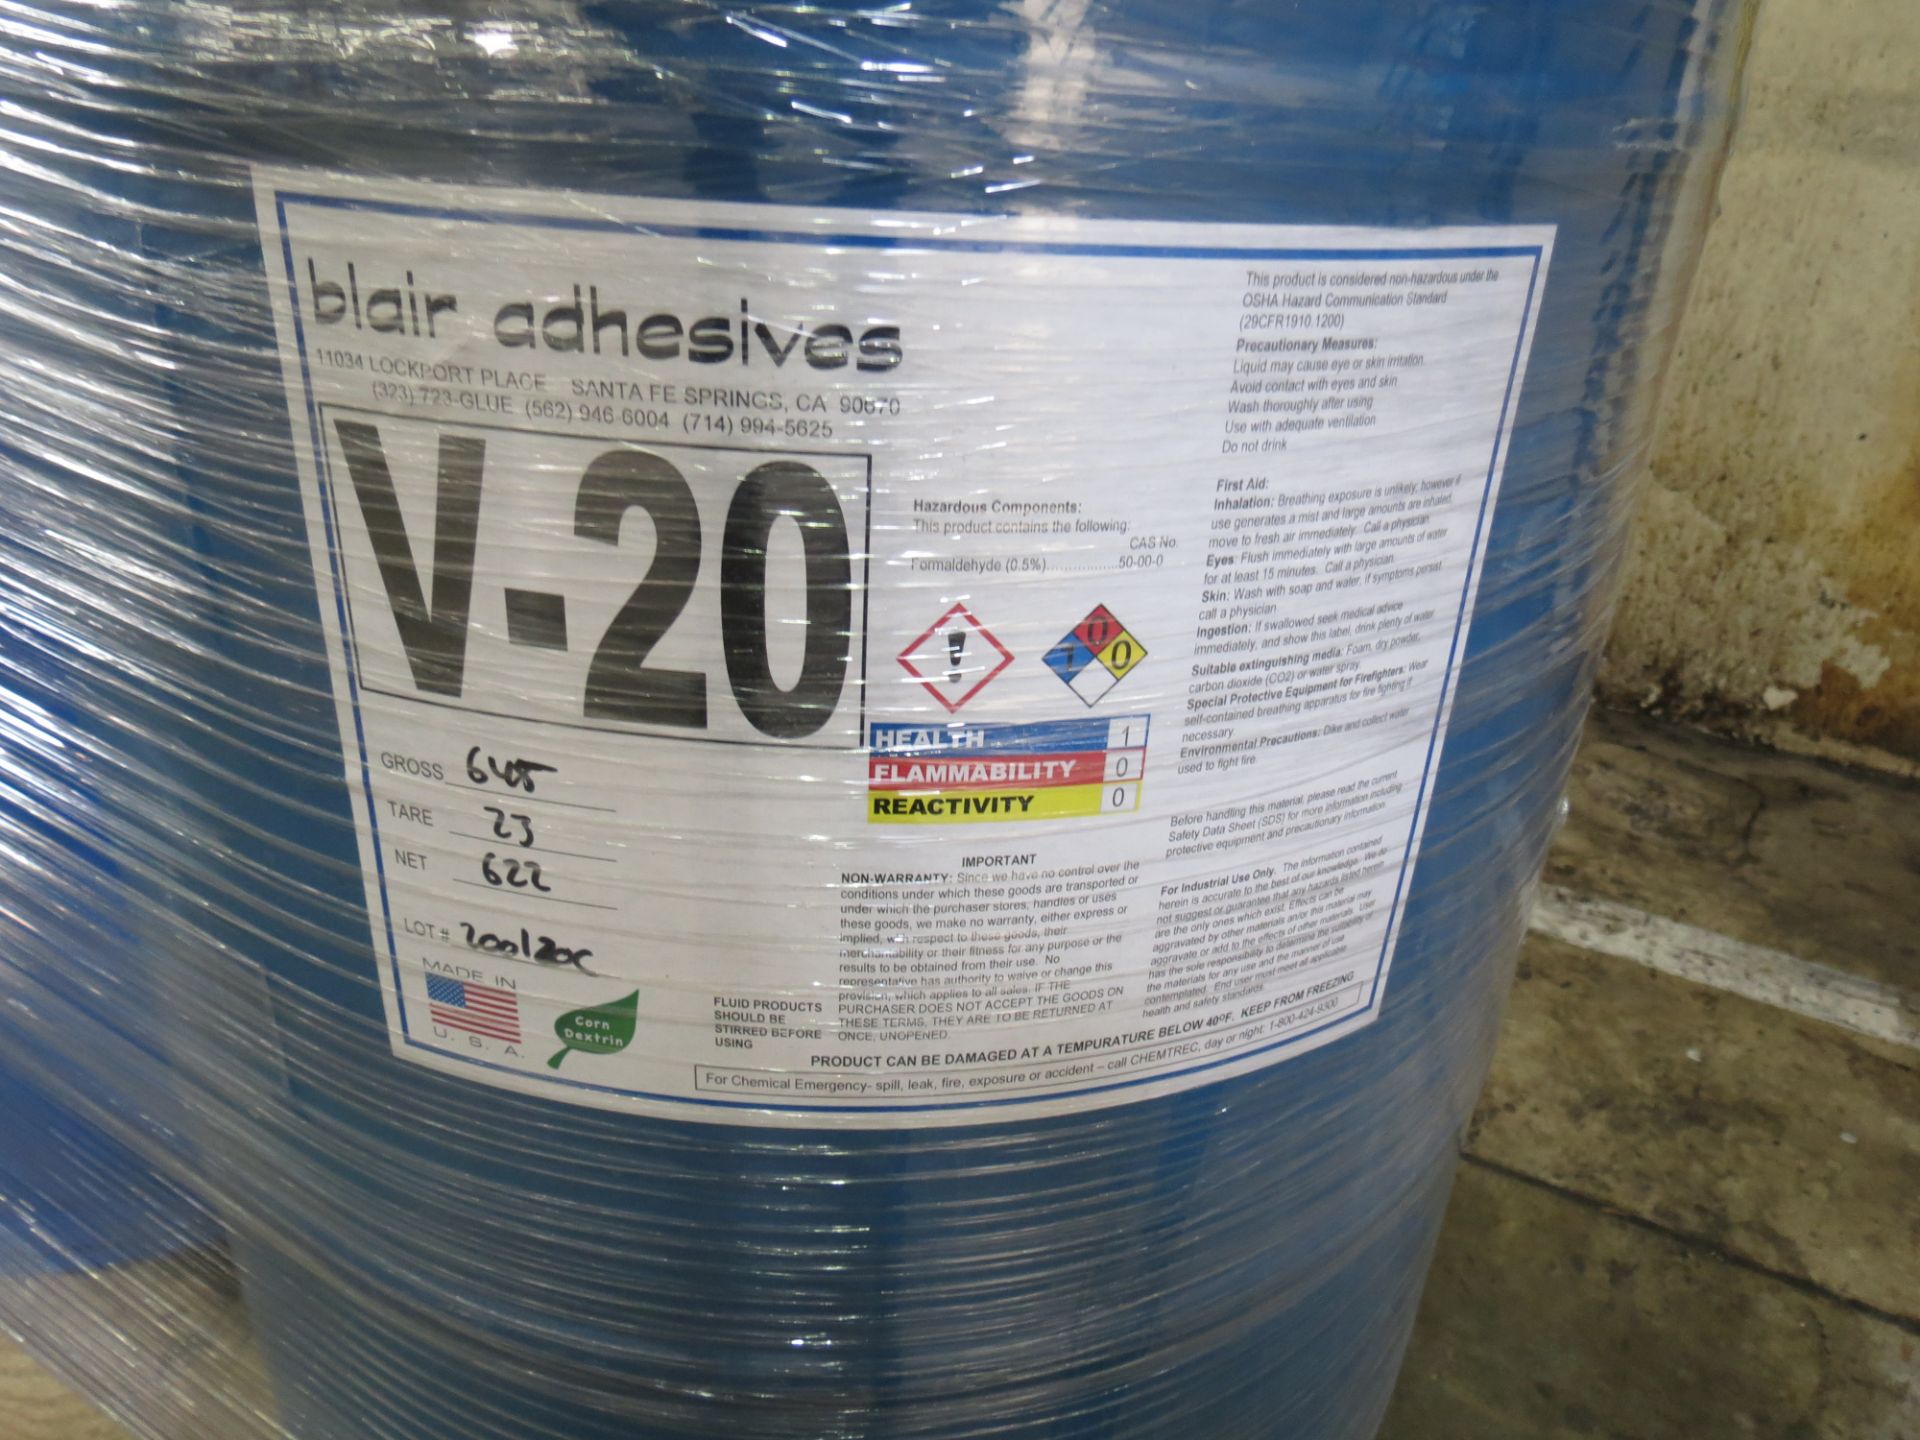 Lot 5-55 Gallon Drums of Blair V20 Adhesive for Laminating Machines - Image 2 of 2